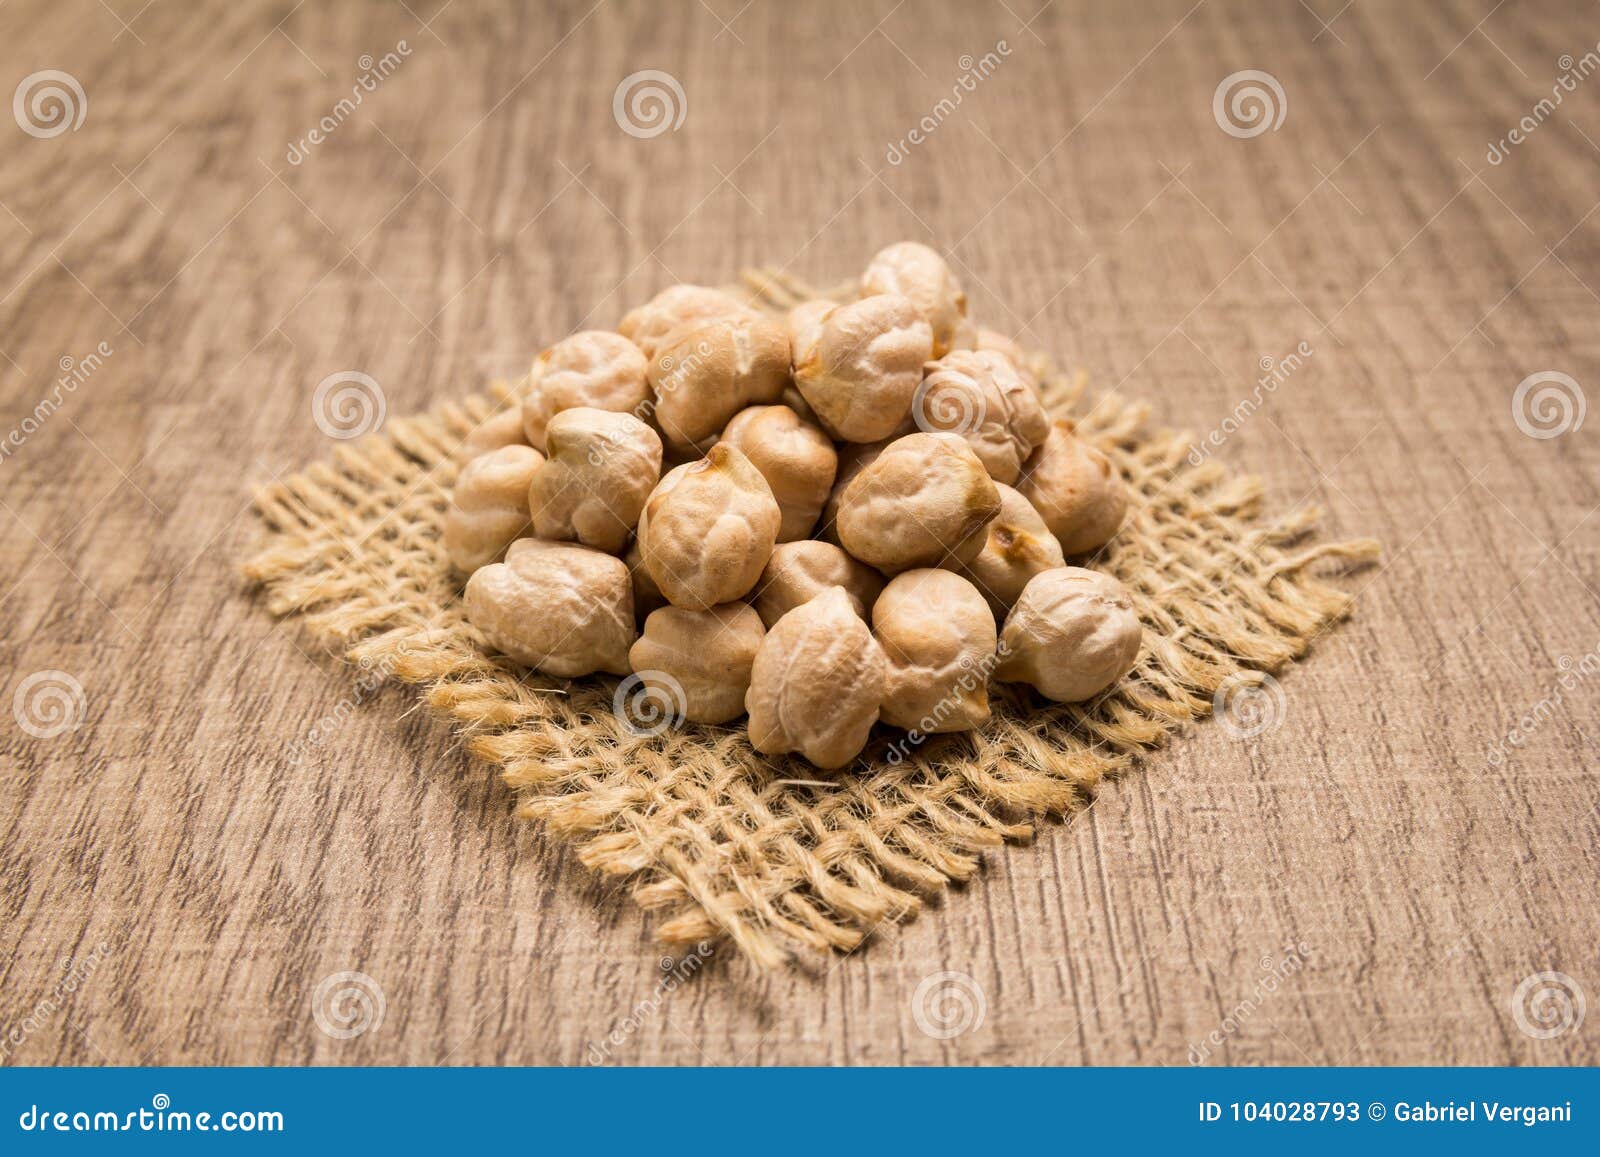 chickpeas legume. grains on square cutout of jute. wooden table.